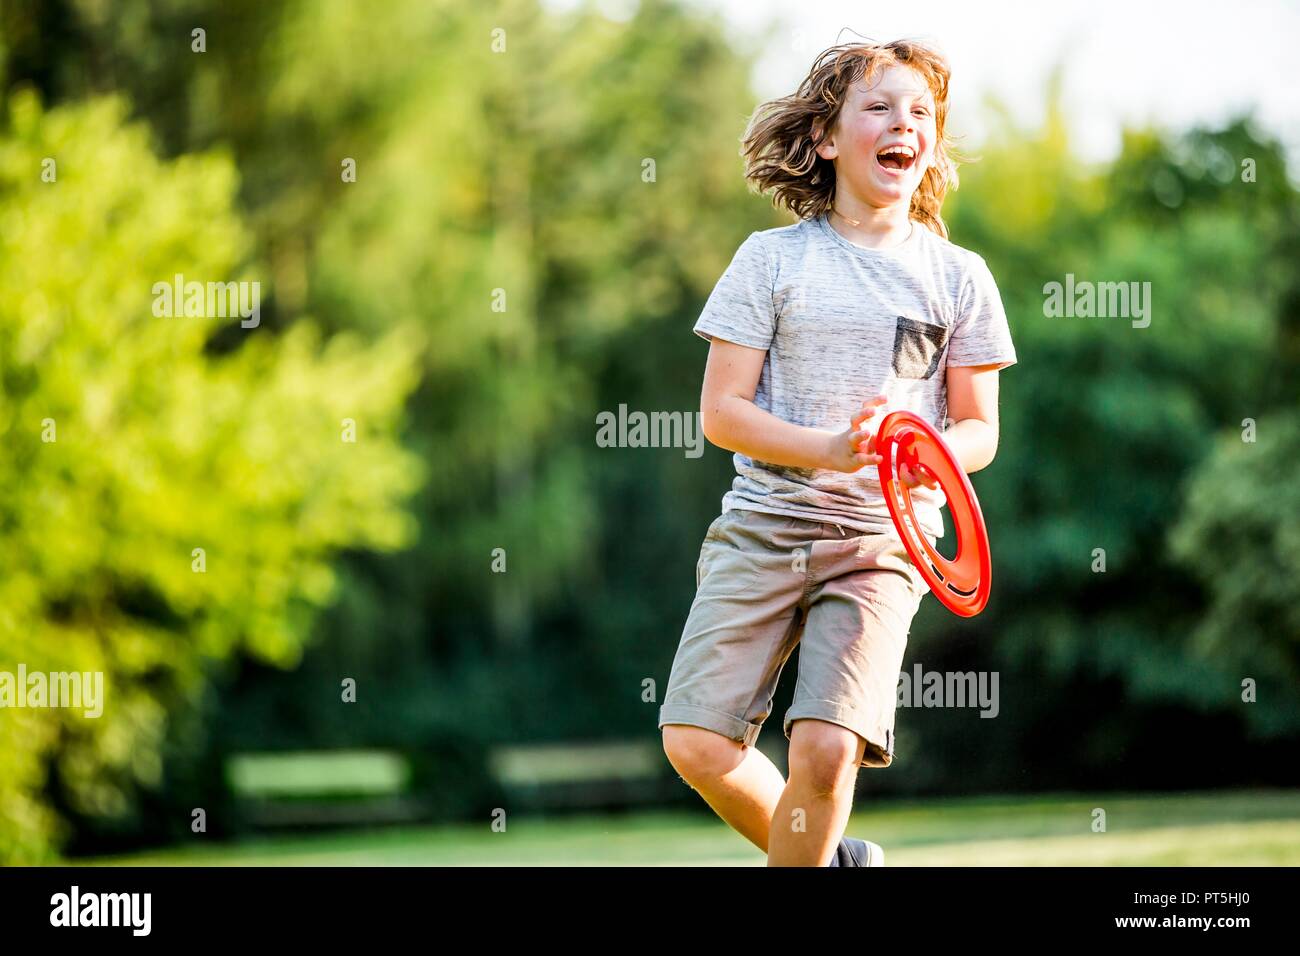 Boy playing with flying disc in park, laughing. Stock Photo